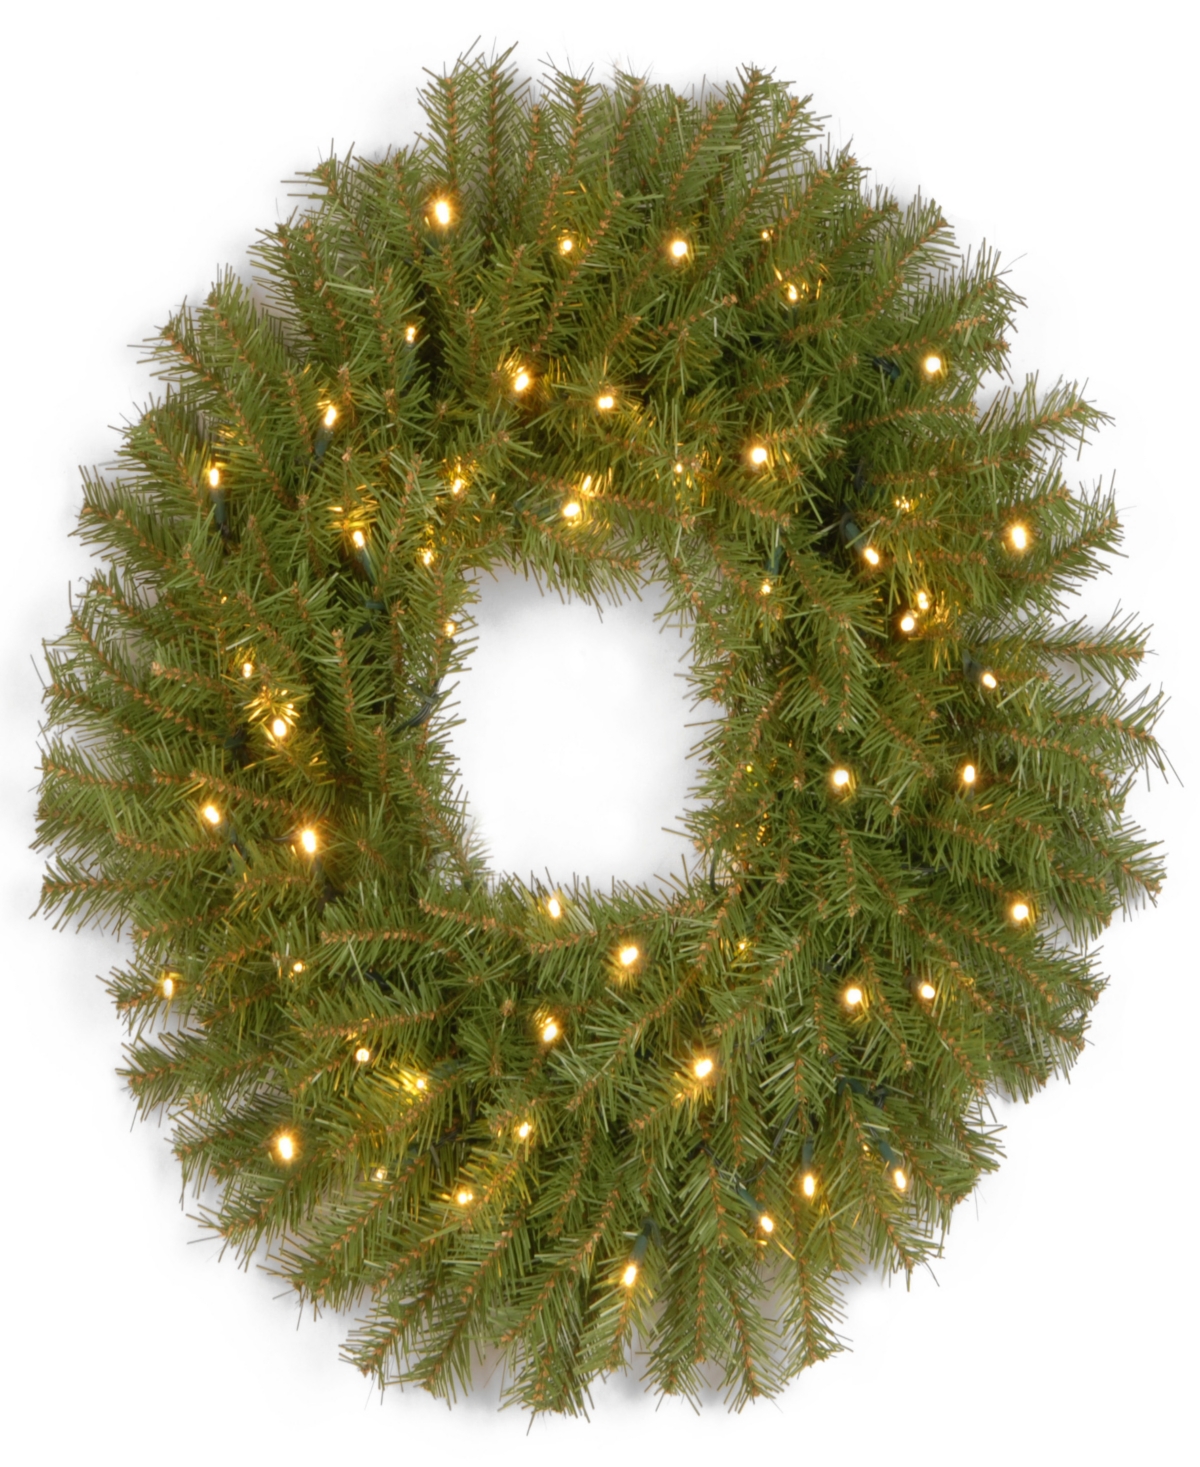 National Tree Company 24" Norwood Fir Wreath With Twinkly Led Lights In Green